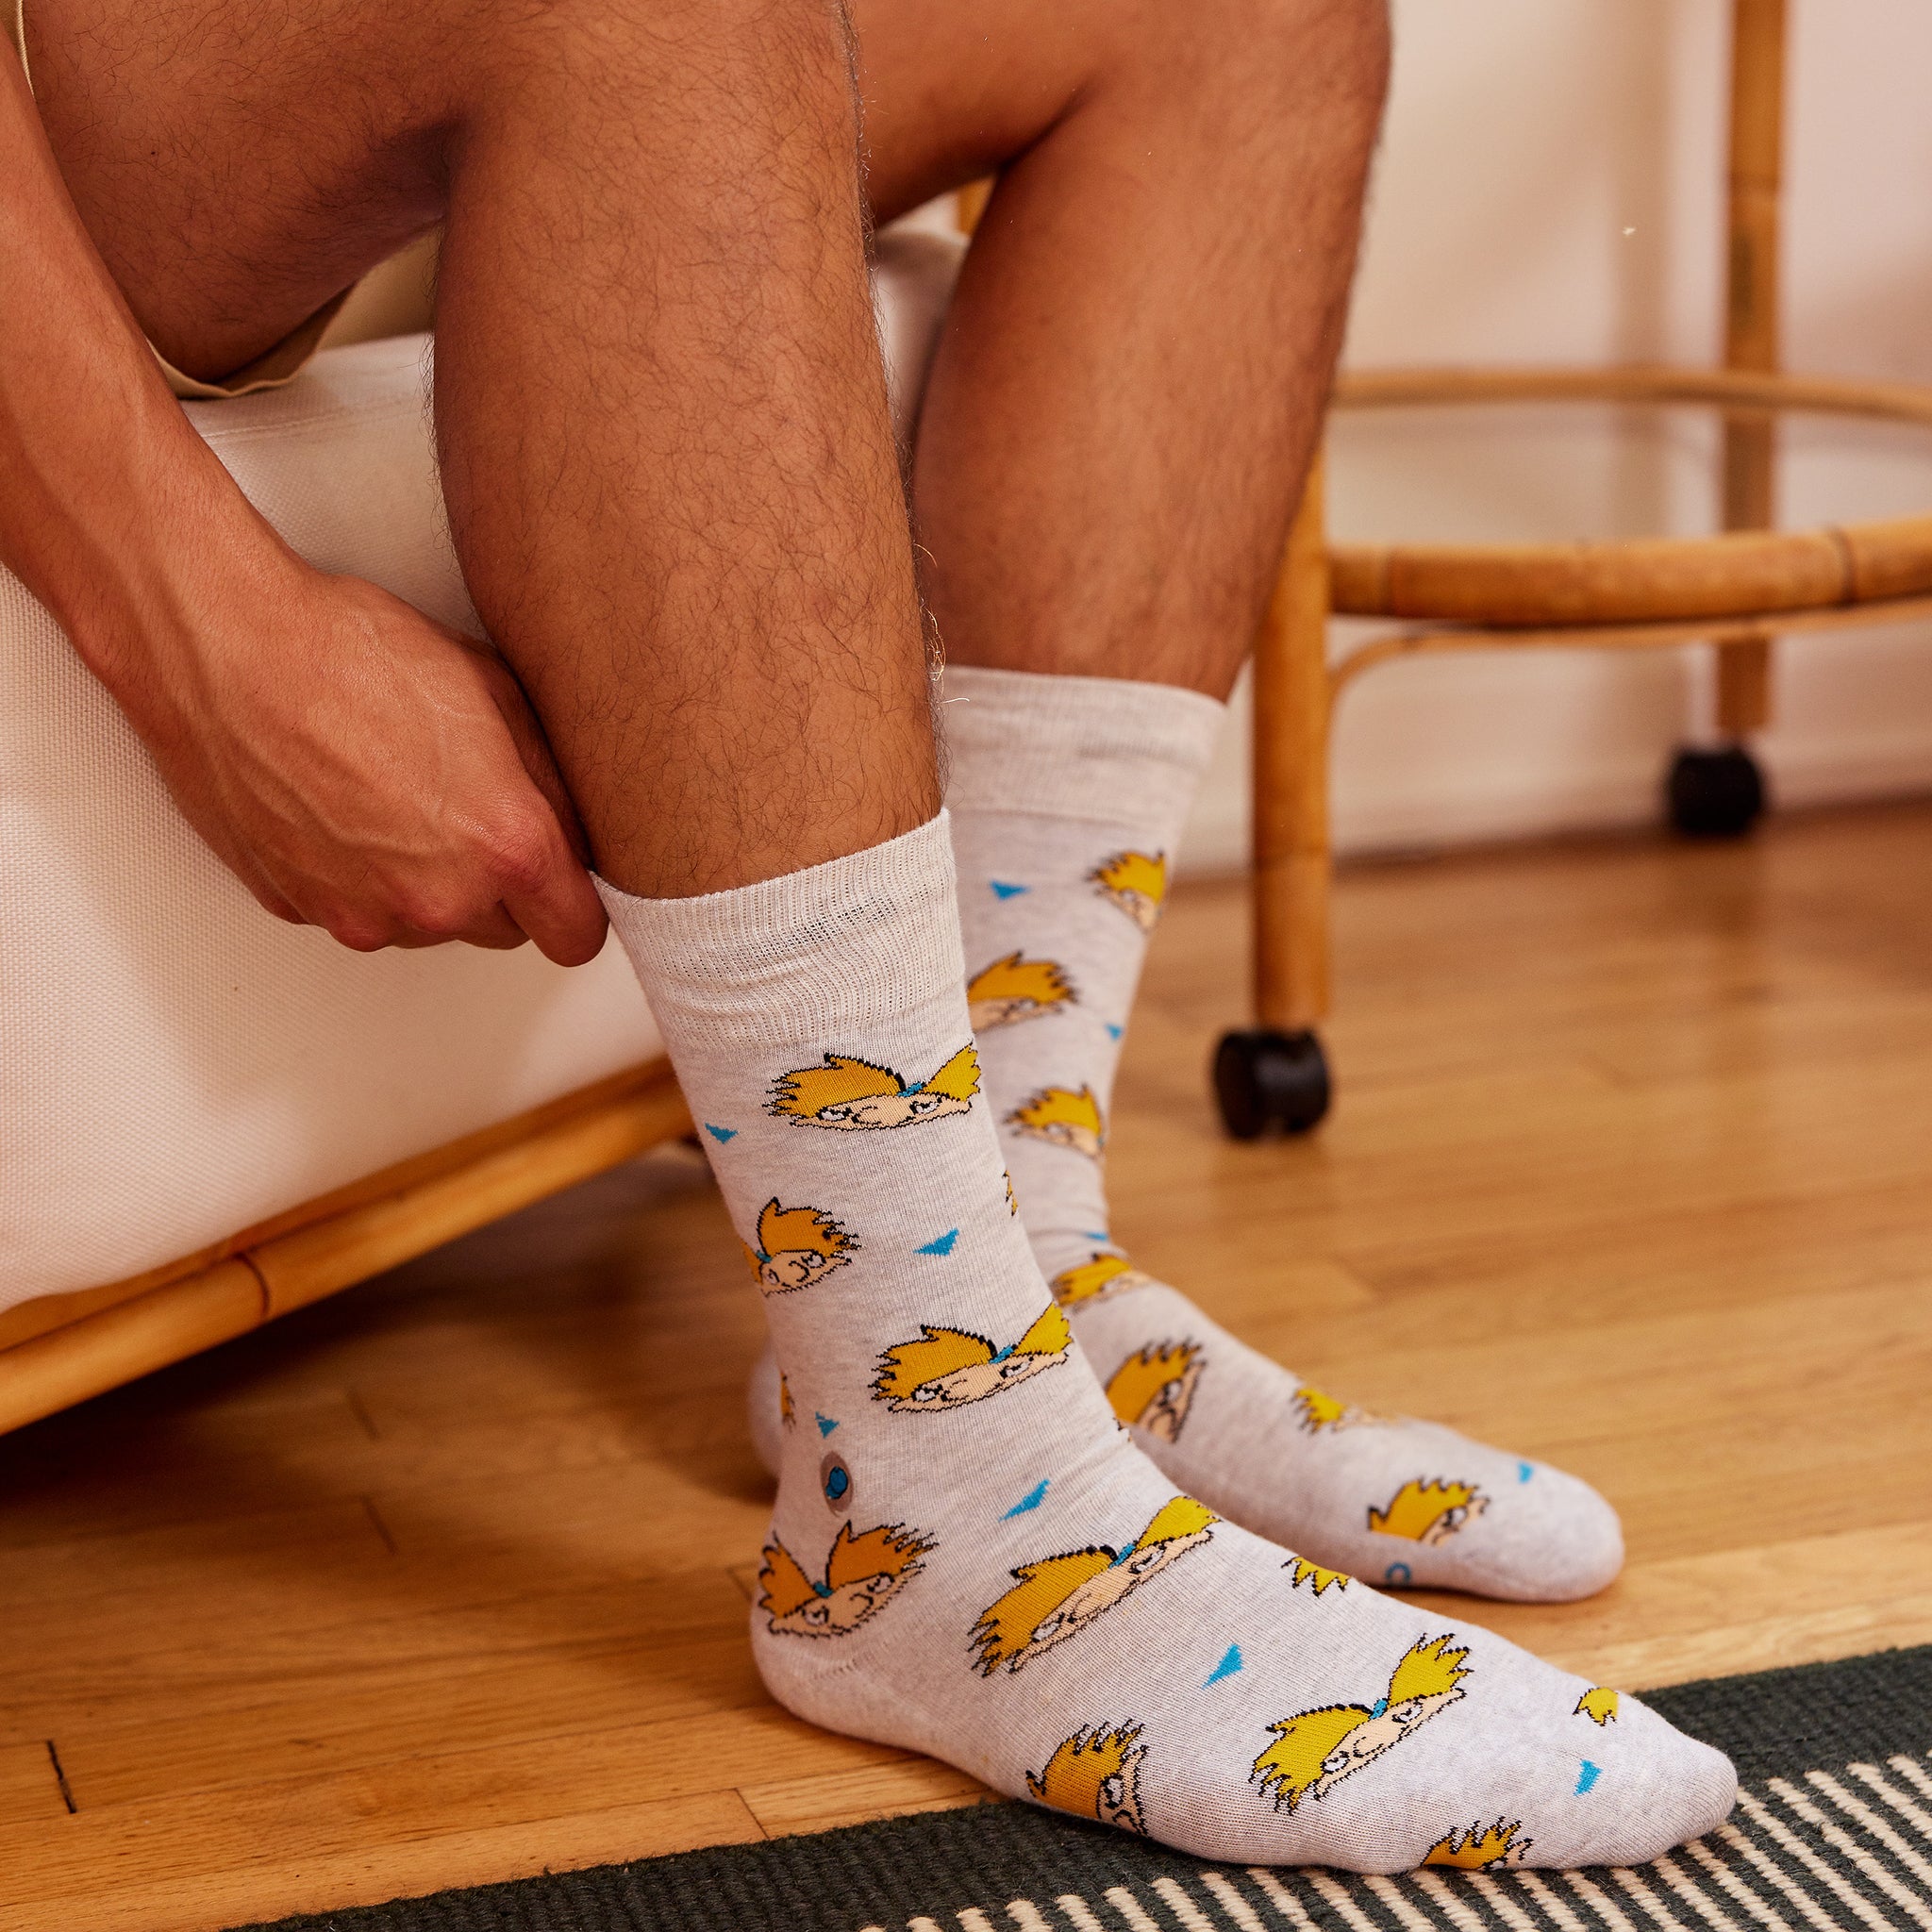 Hey Arnold Socks that Give Books